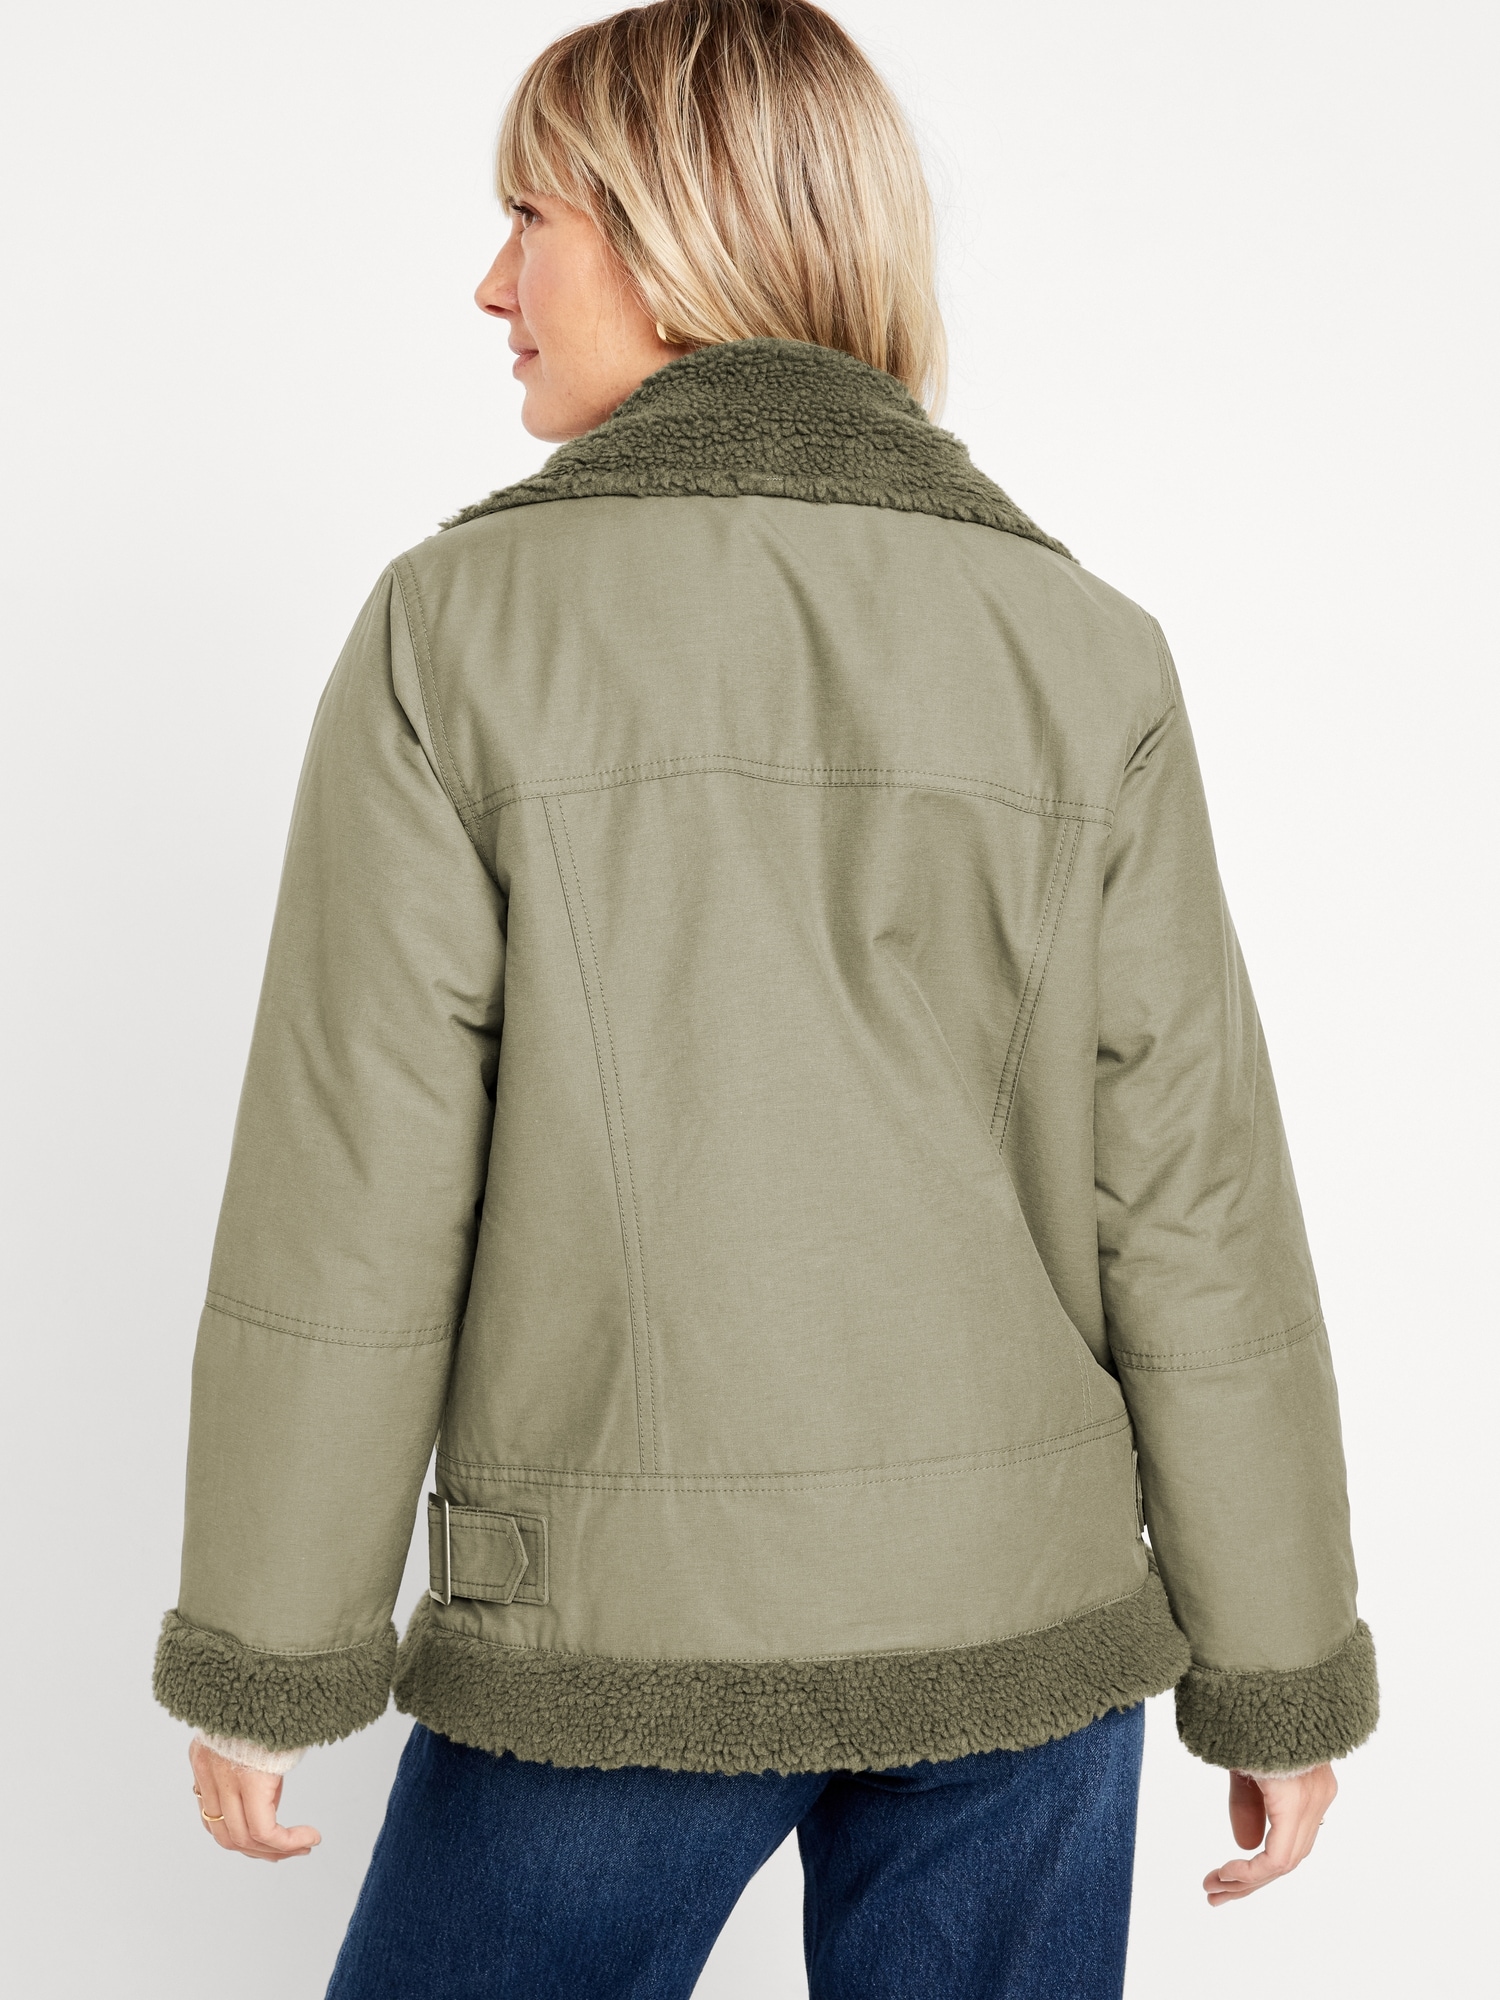 Sherpa-Lined Utility Jacket for Women Old | Navy